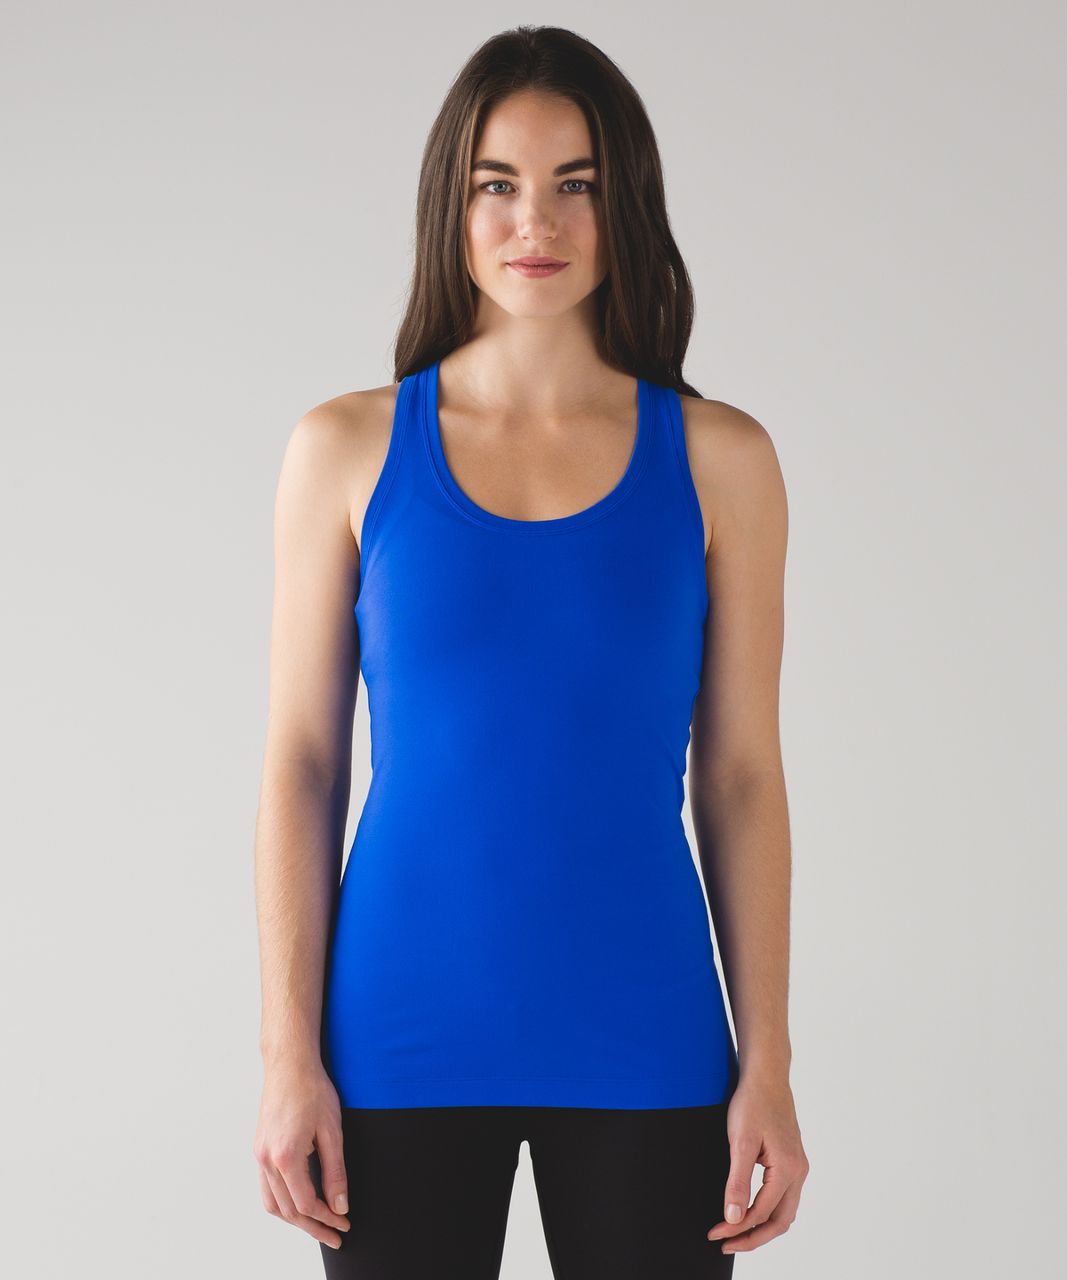 Lululemon Racerback Tank Blue Size 6 - $32 (44% Off Retail) New With Tags -  From Emily